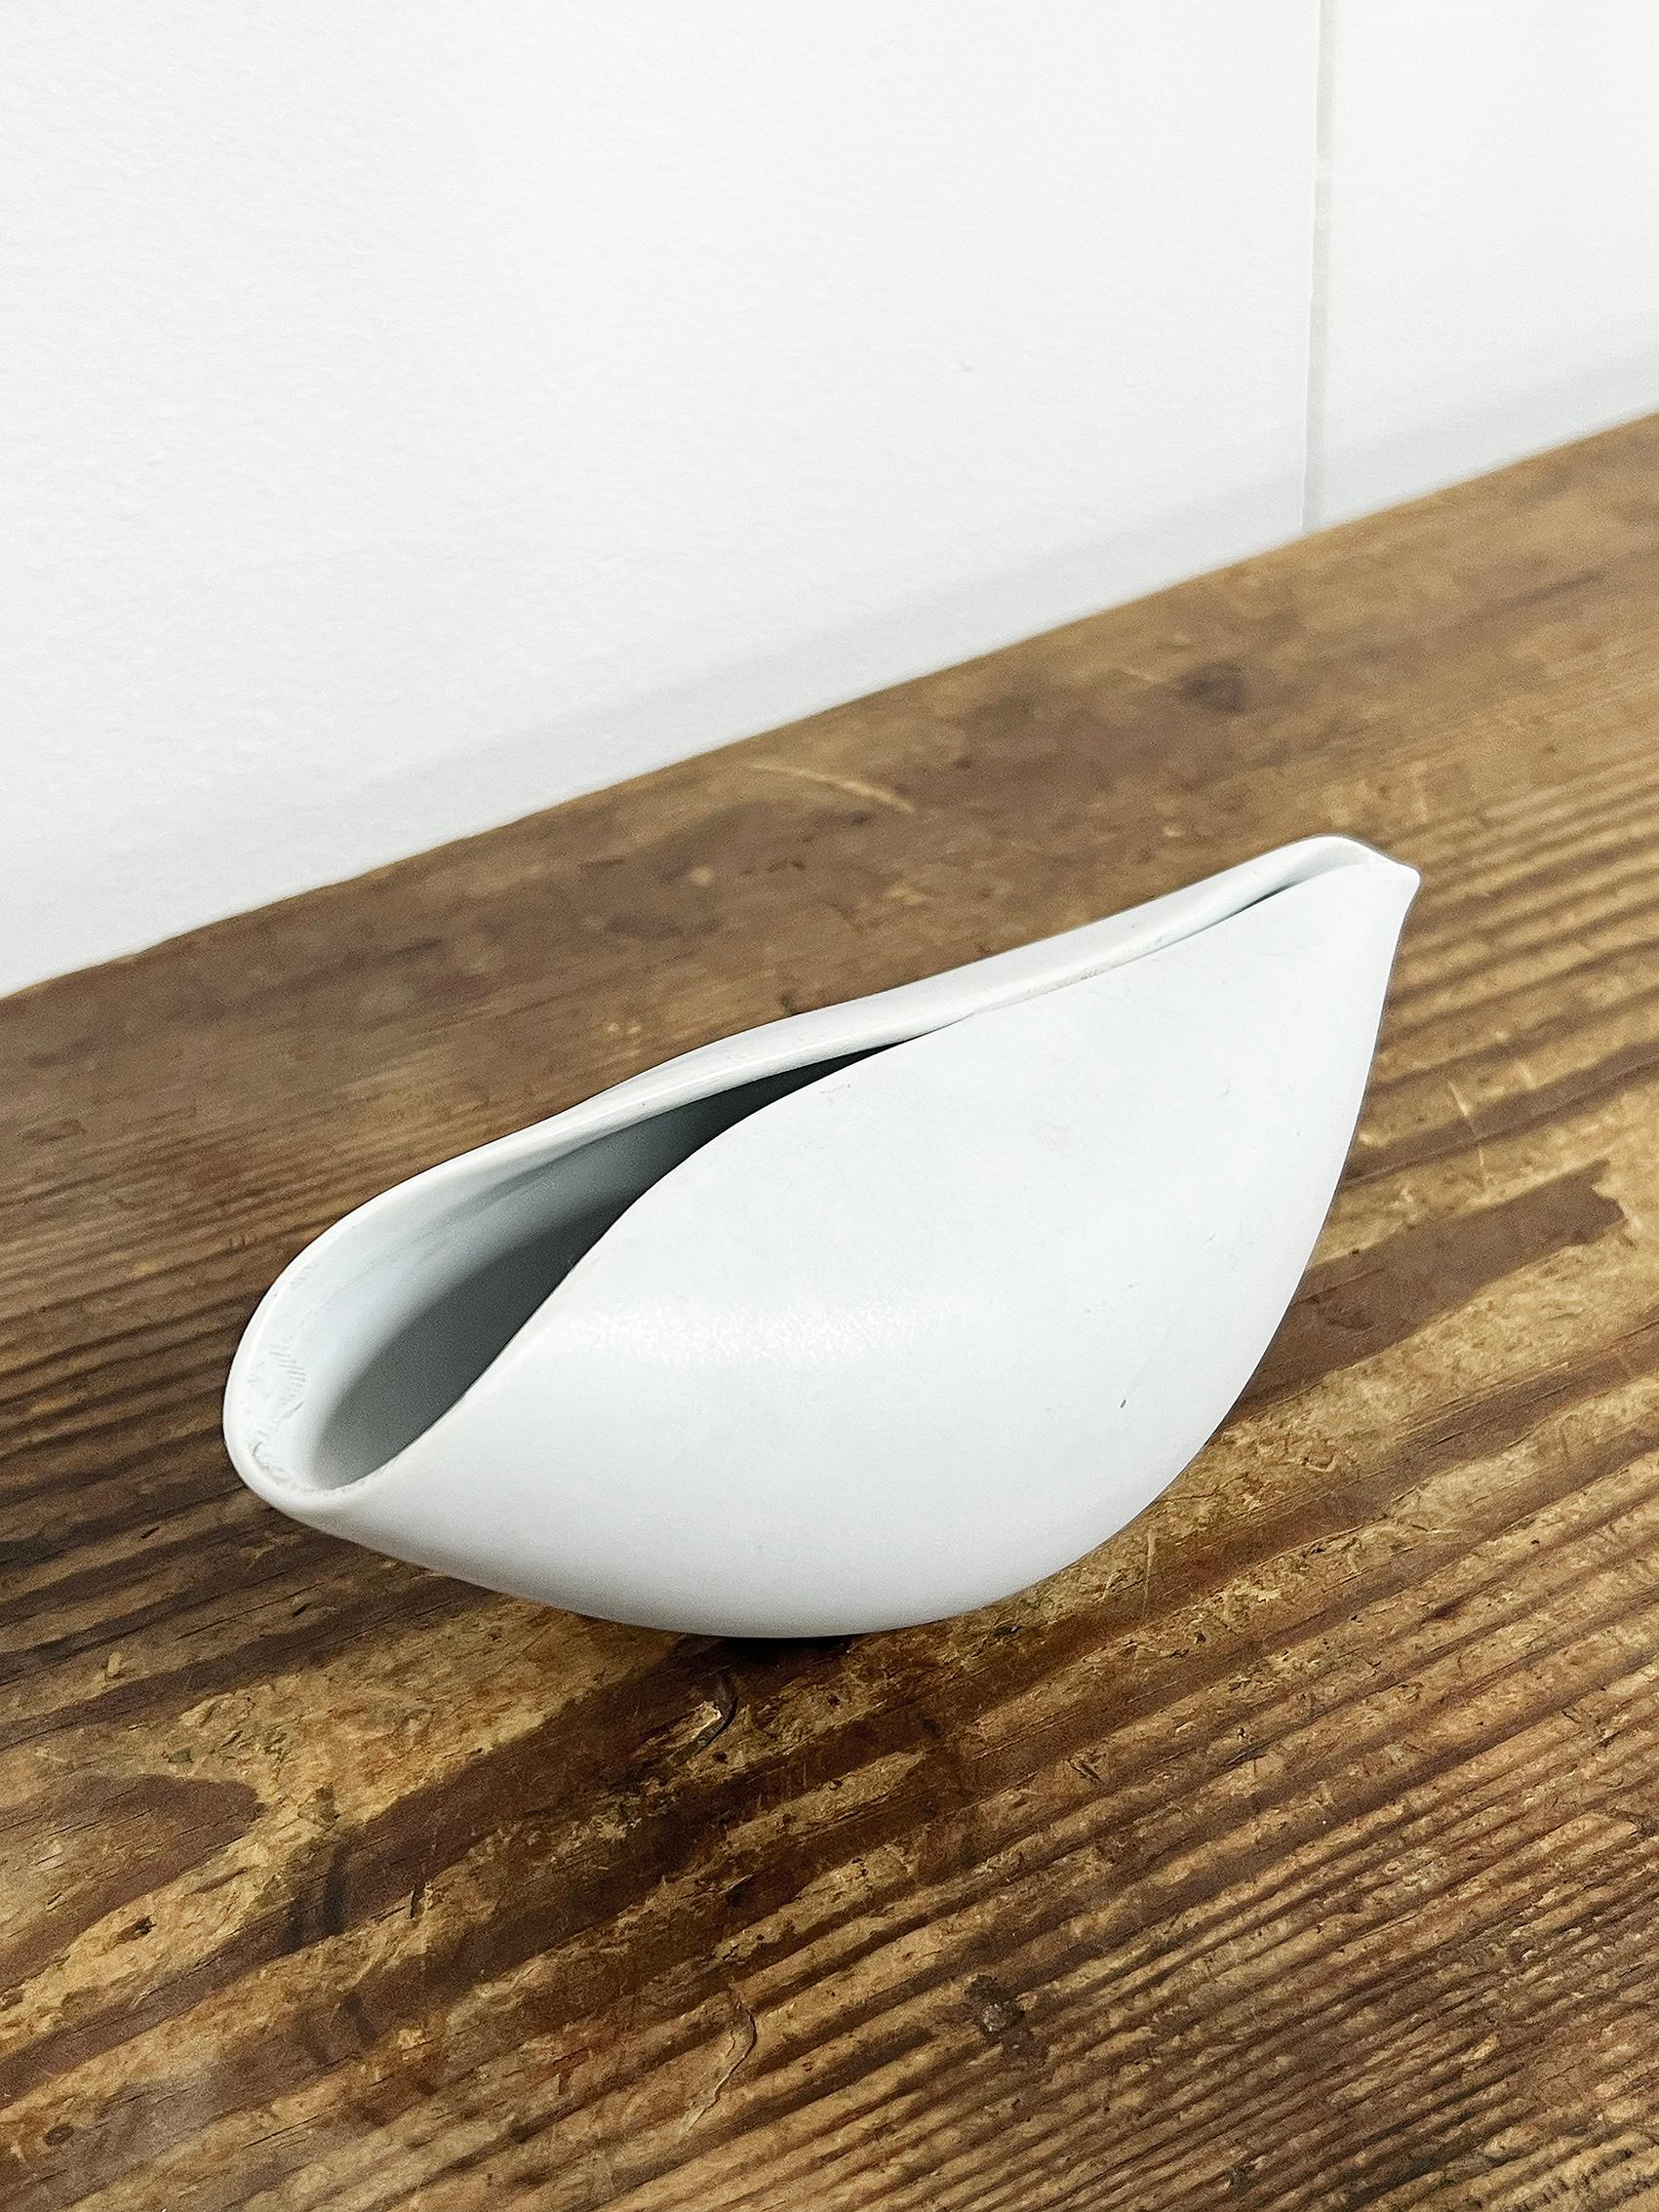 Mid-20th Century “Veckla” Bowl by Stig Lindberg for Gustavsberg 1950's For Sale